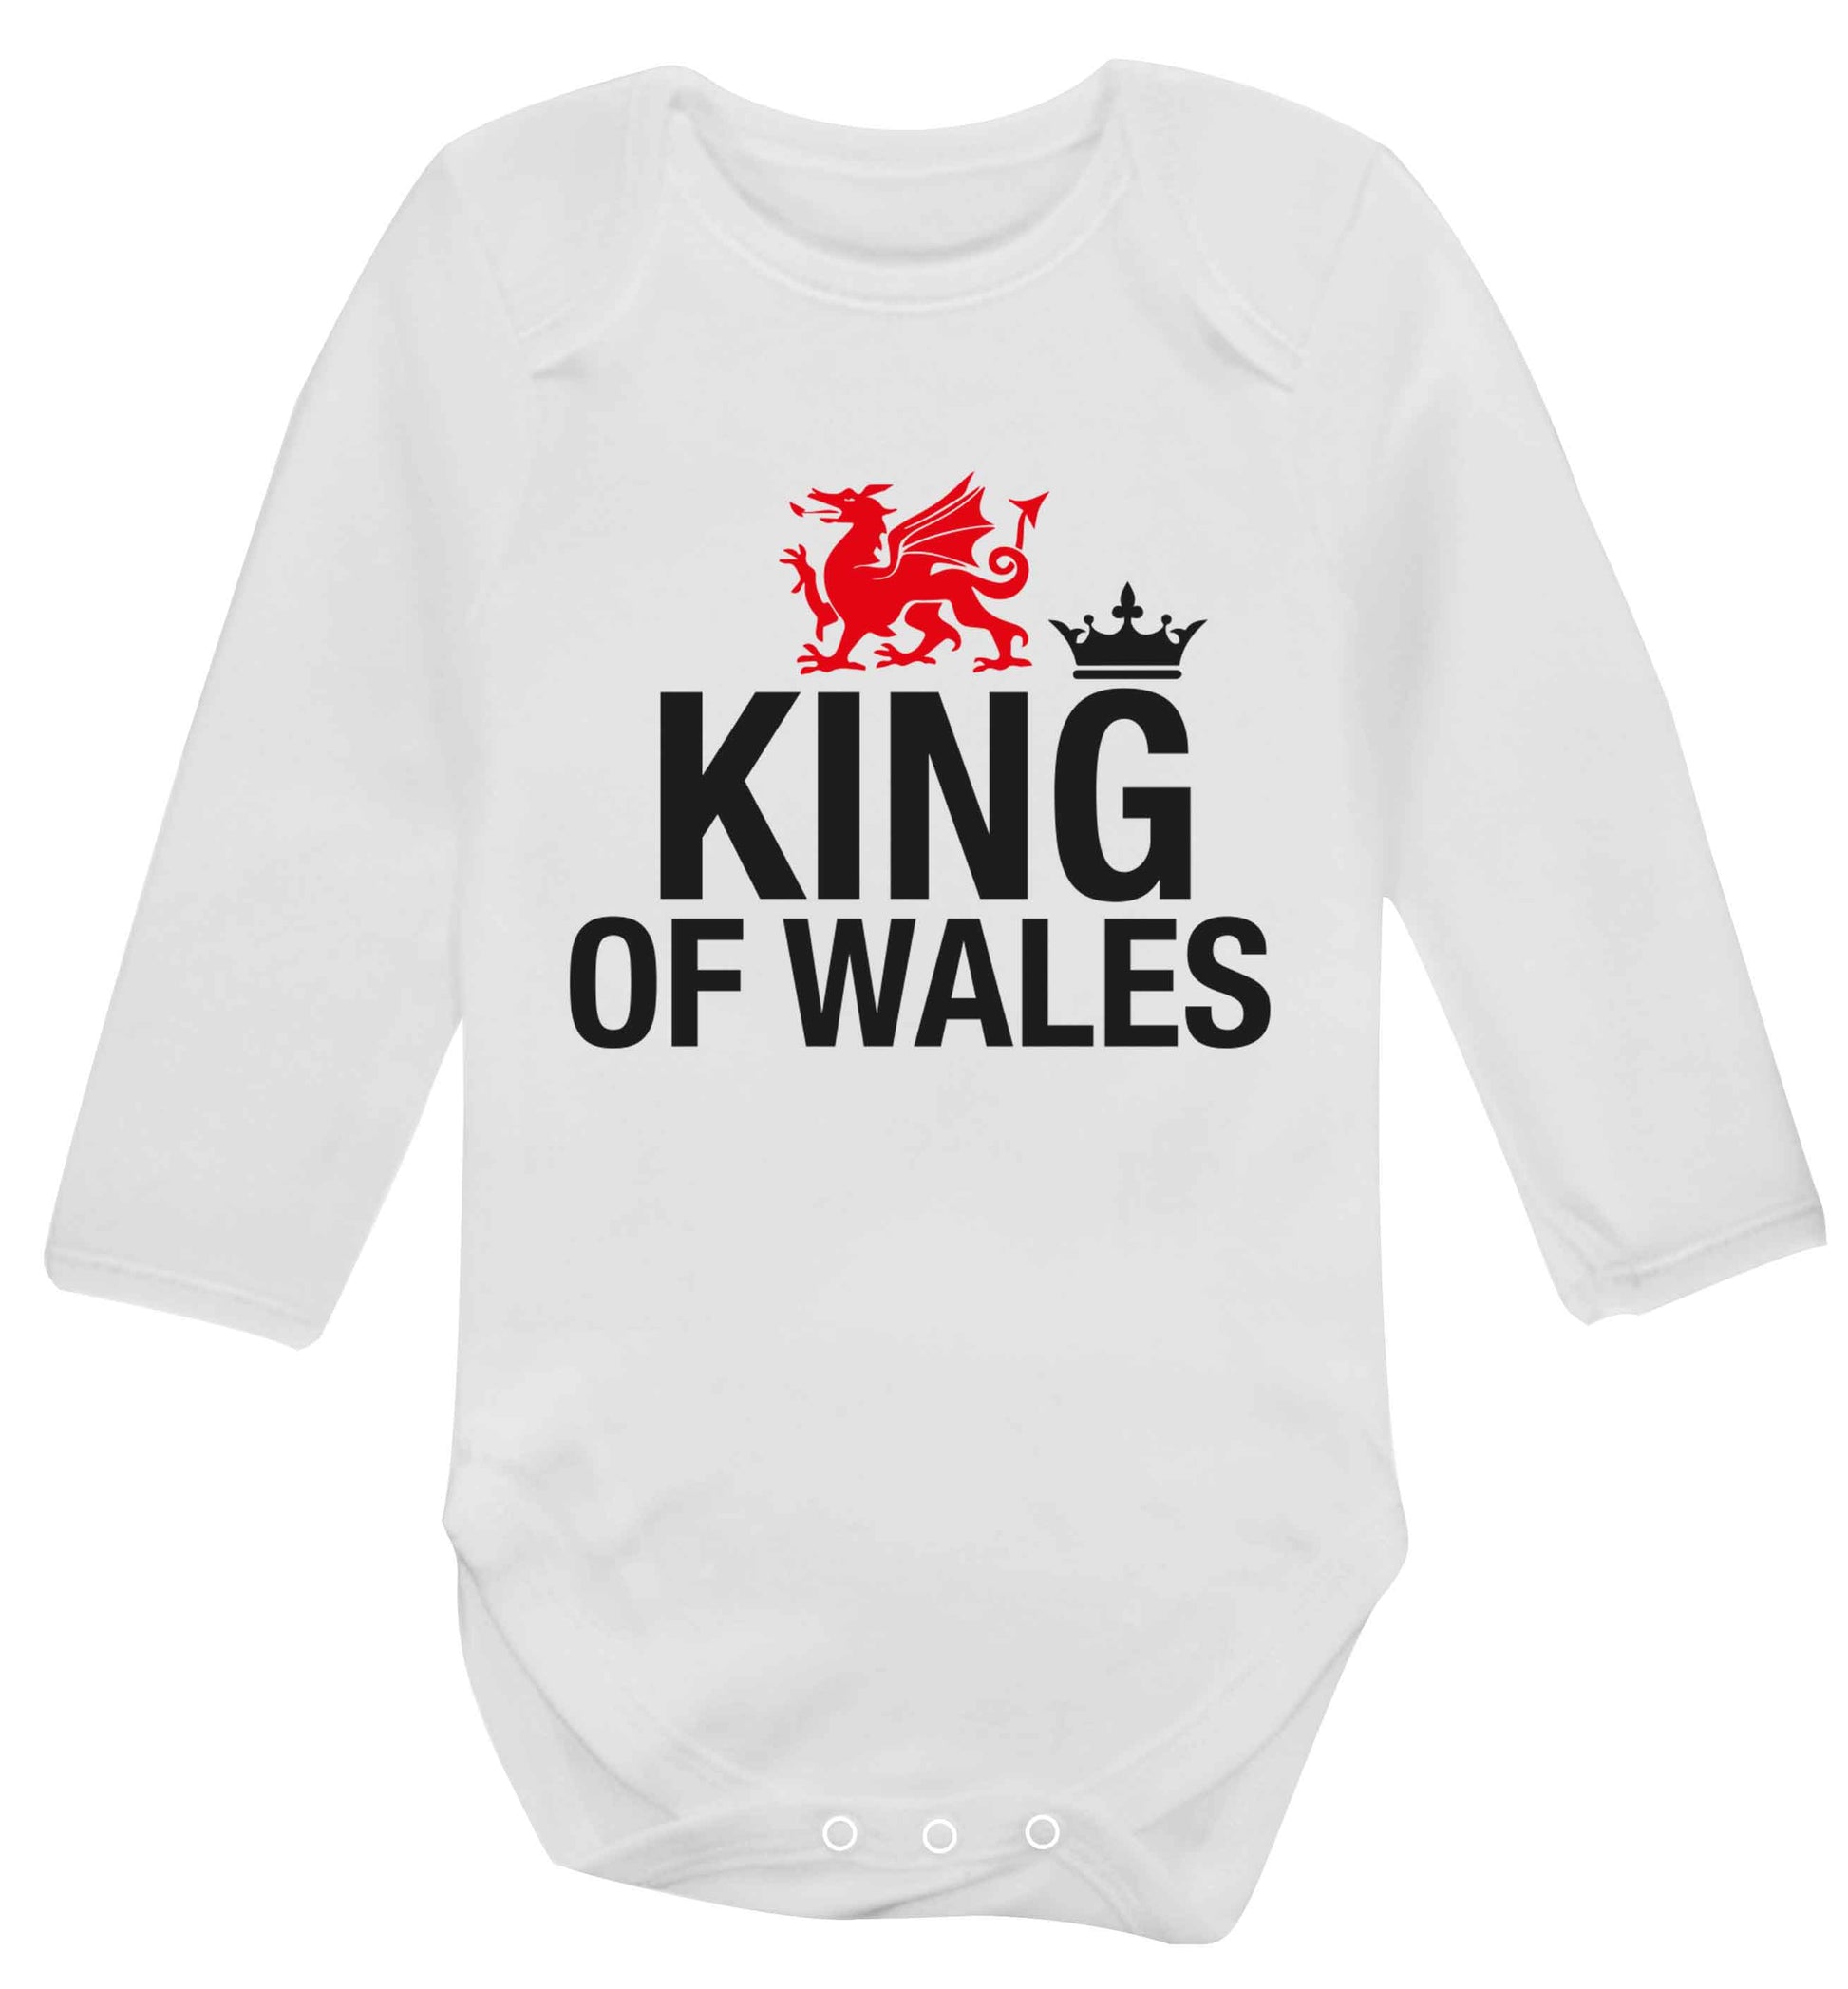 King of Wales Baby Vest long sleeved white 6-12 months